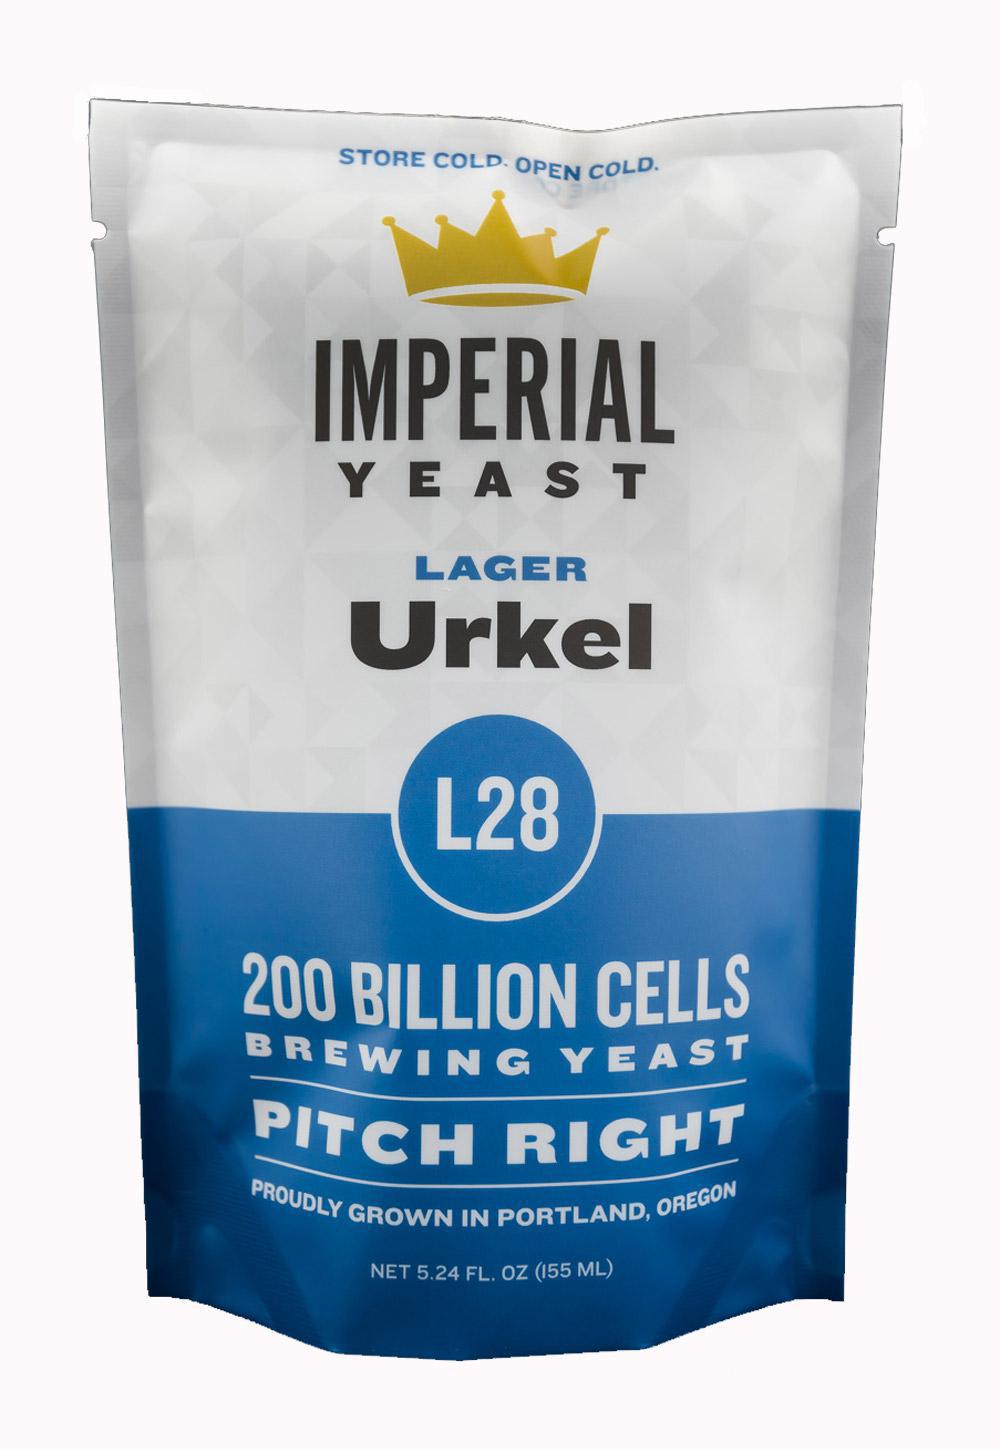 L28 Urkel Lager Yeast - Imperial Yeast